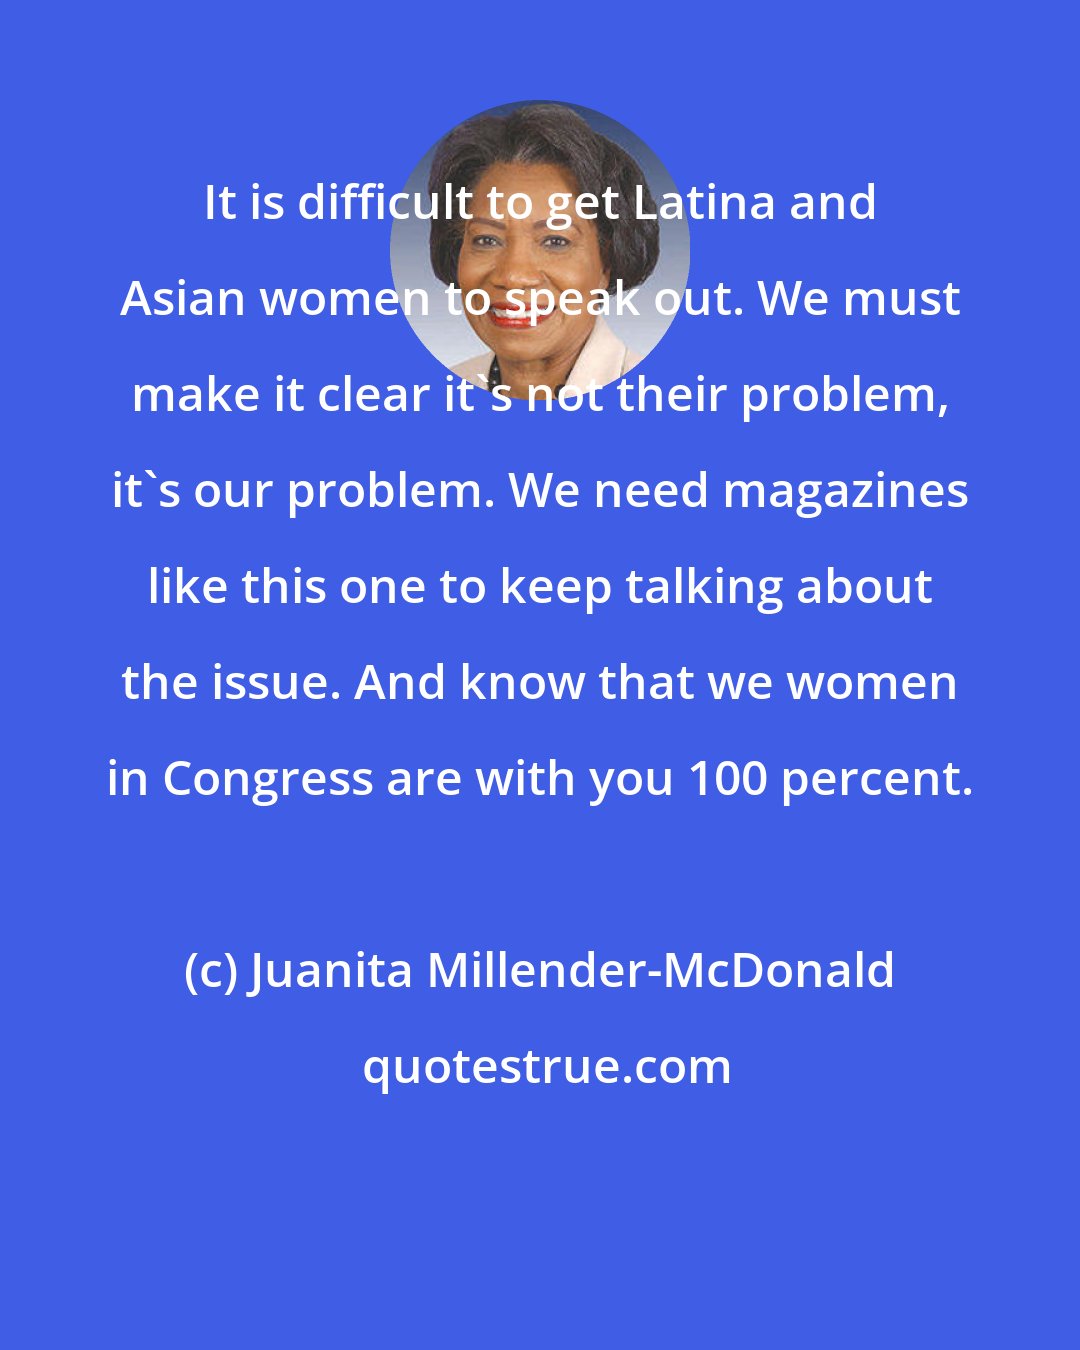 Juanita Millender-McDonald: It is difficult to get Latina and Asian women to speak out. We must make it clear it's not their problem, it's our problem. We need magazines like this one to keep talking about the issue. And know that we women in Congress are with you 100 percent.